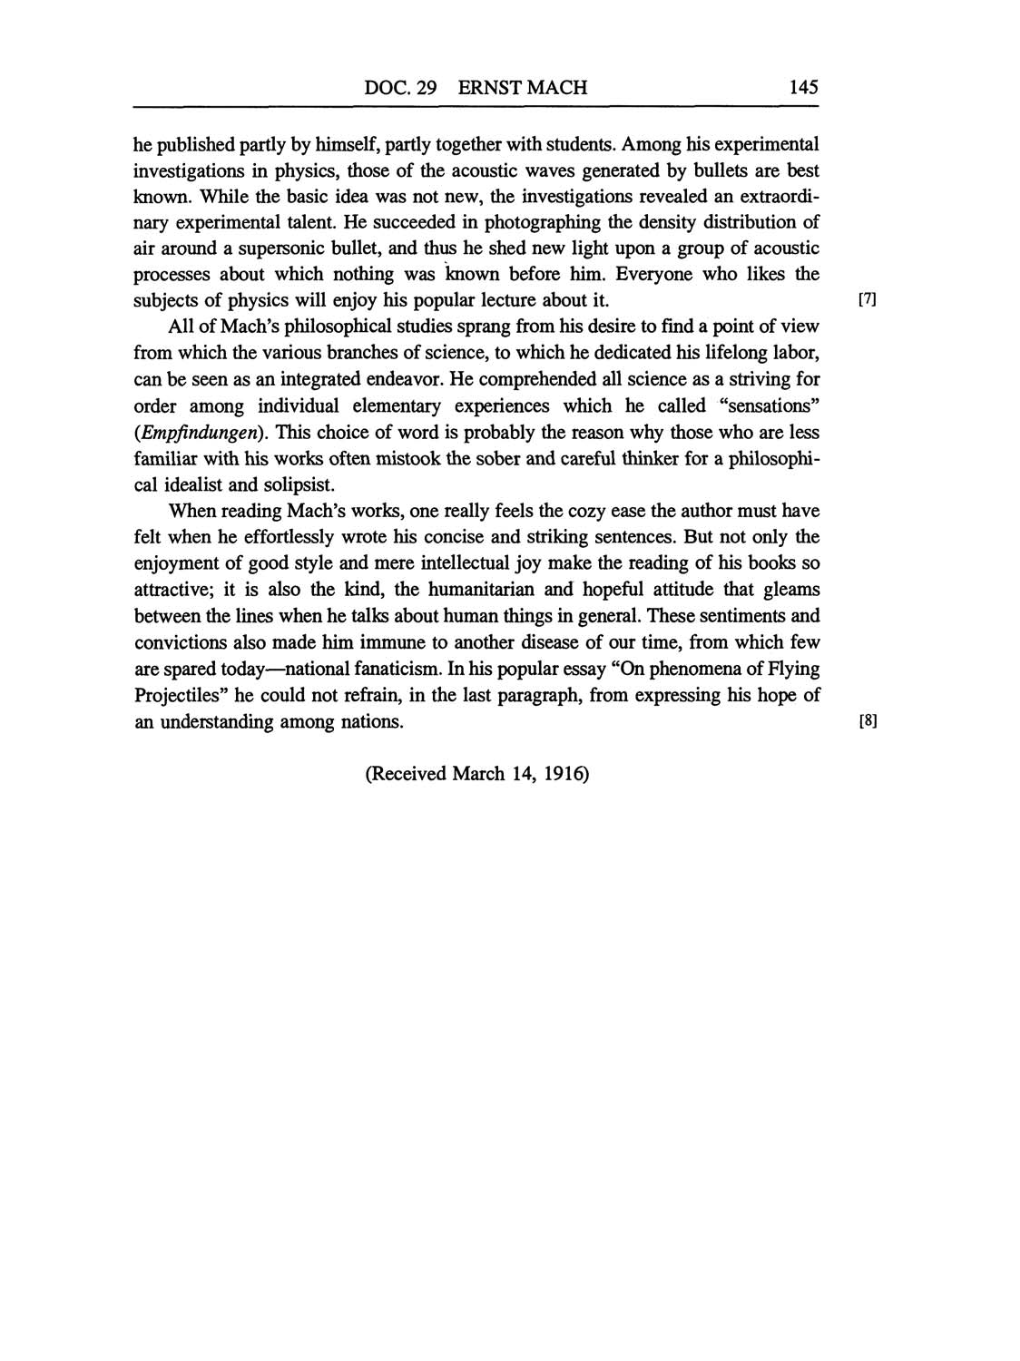 Volume 6: The Berlin Years: Writings, 1914-1917 (English translation supplement) page 145